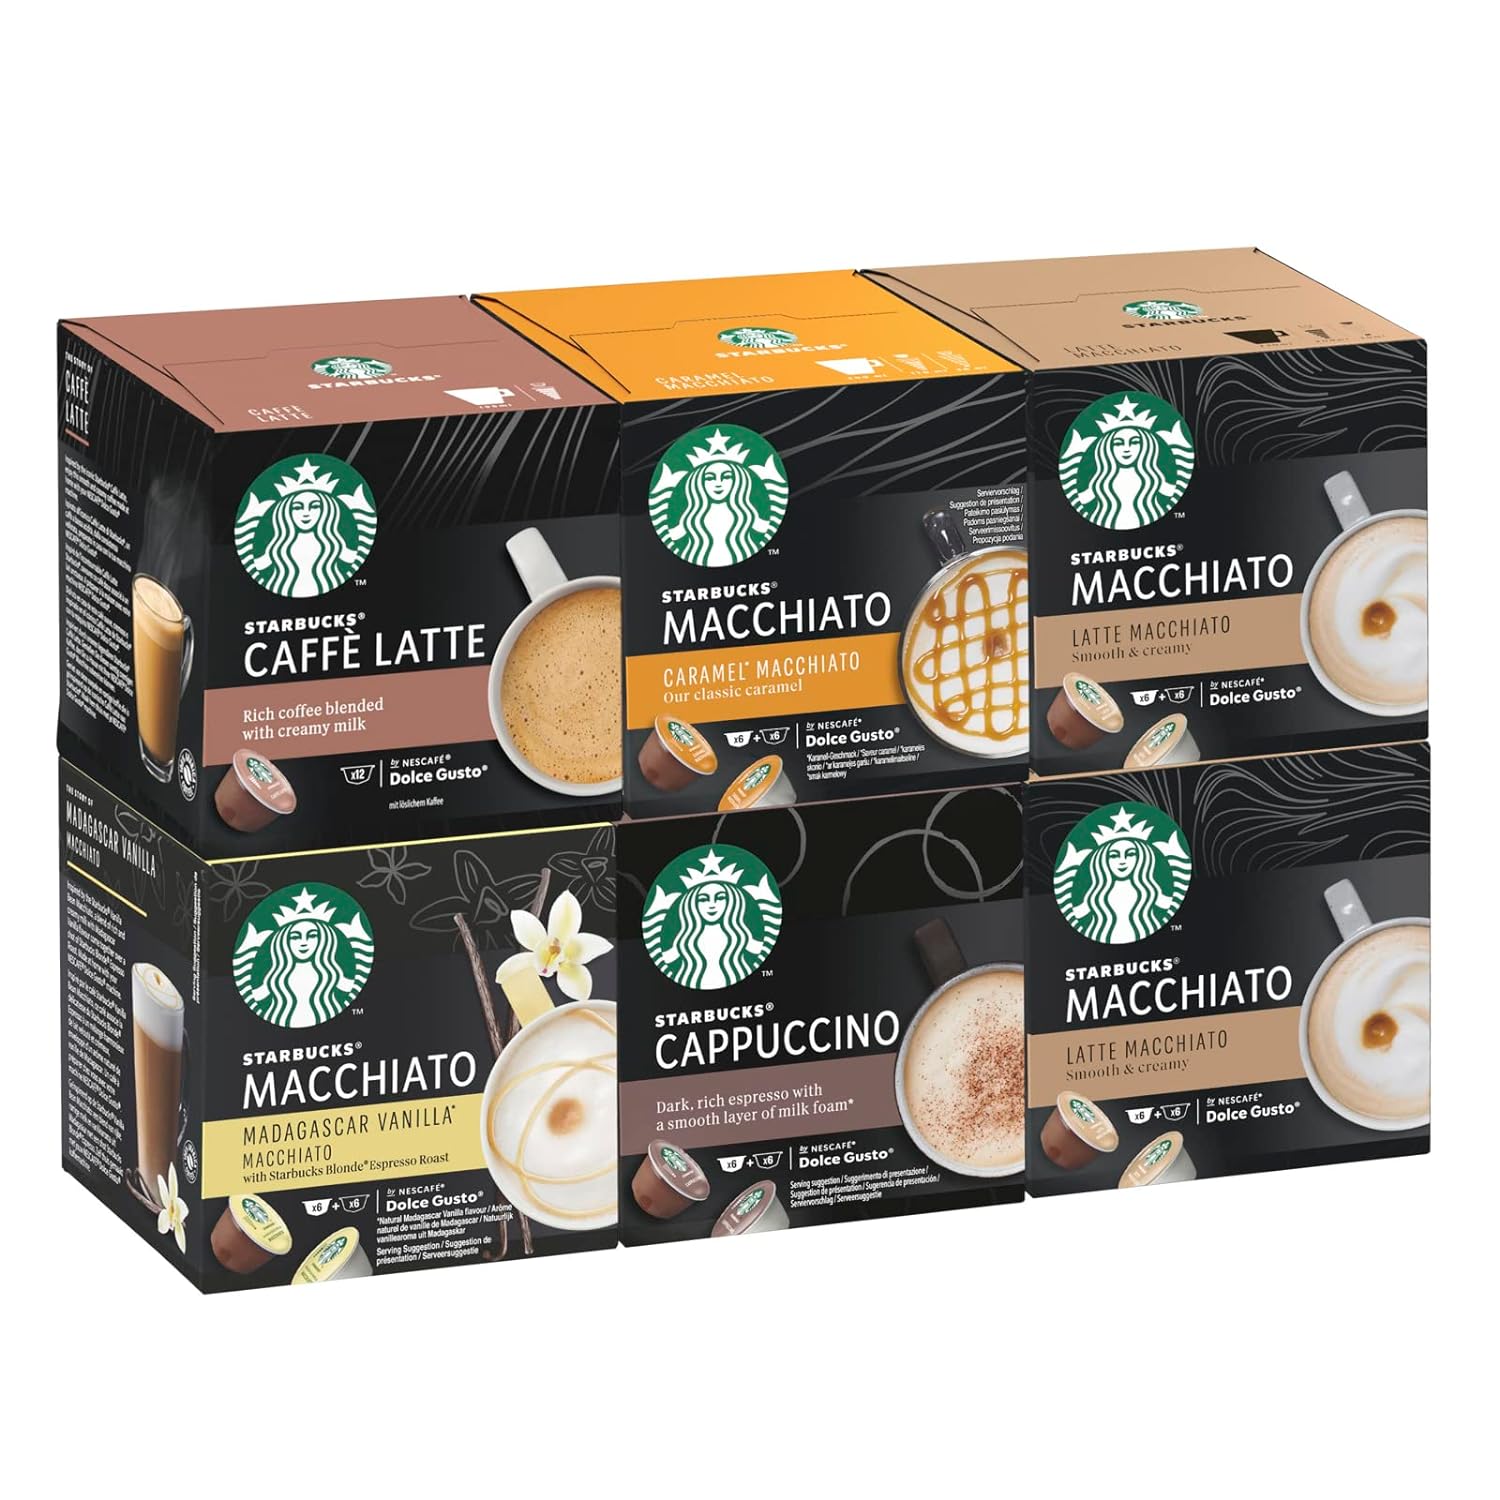 Starbucks Tasting Set, White Cup Variety Pack by Nescafé Dolce Gusto Coffee Capsules 6 x 12 (72 Capsules) - Exclusive to Amazon